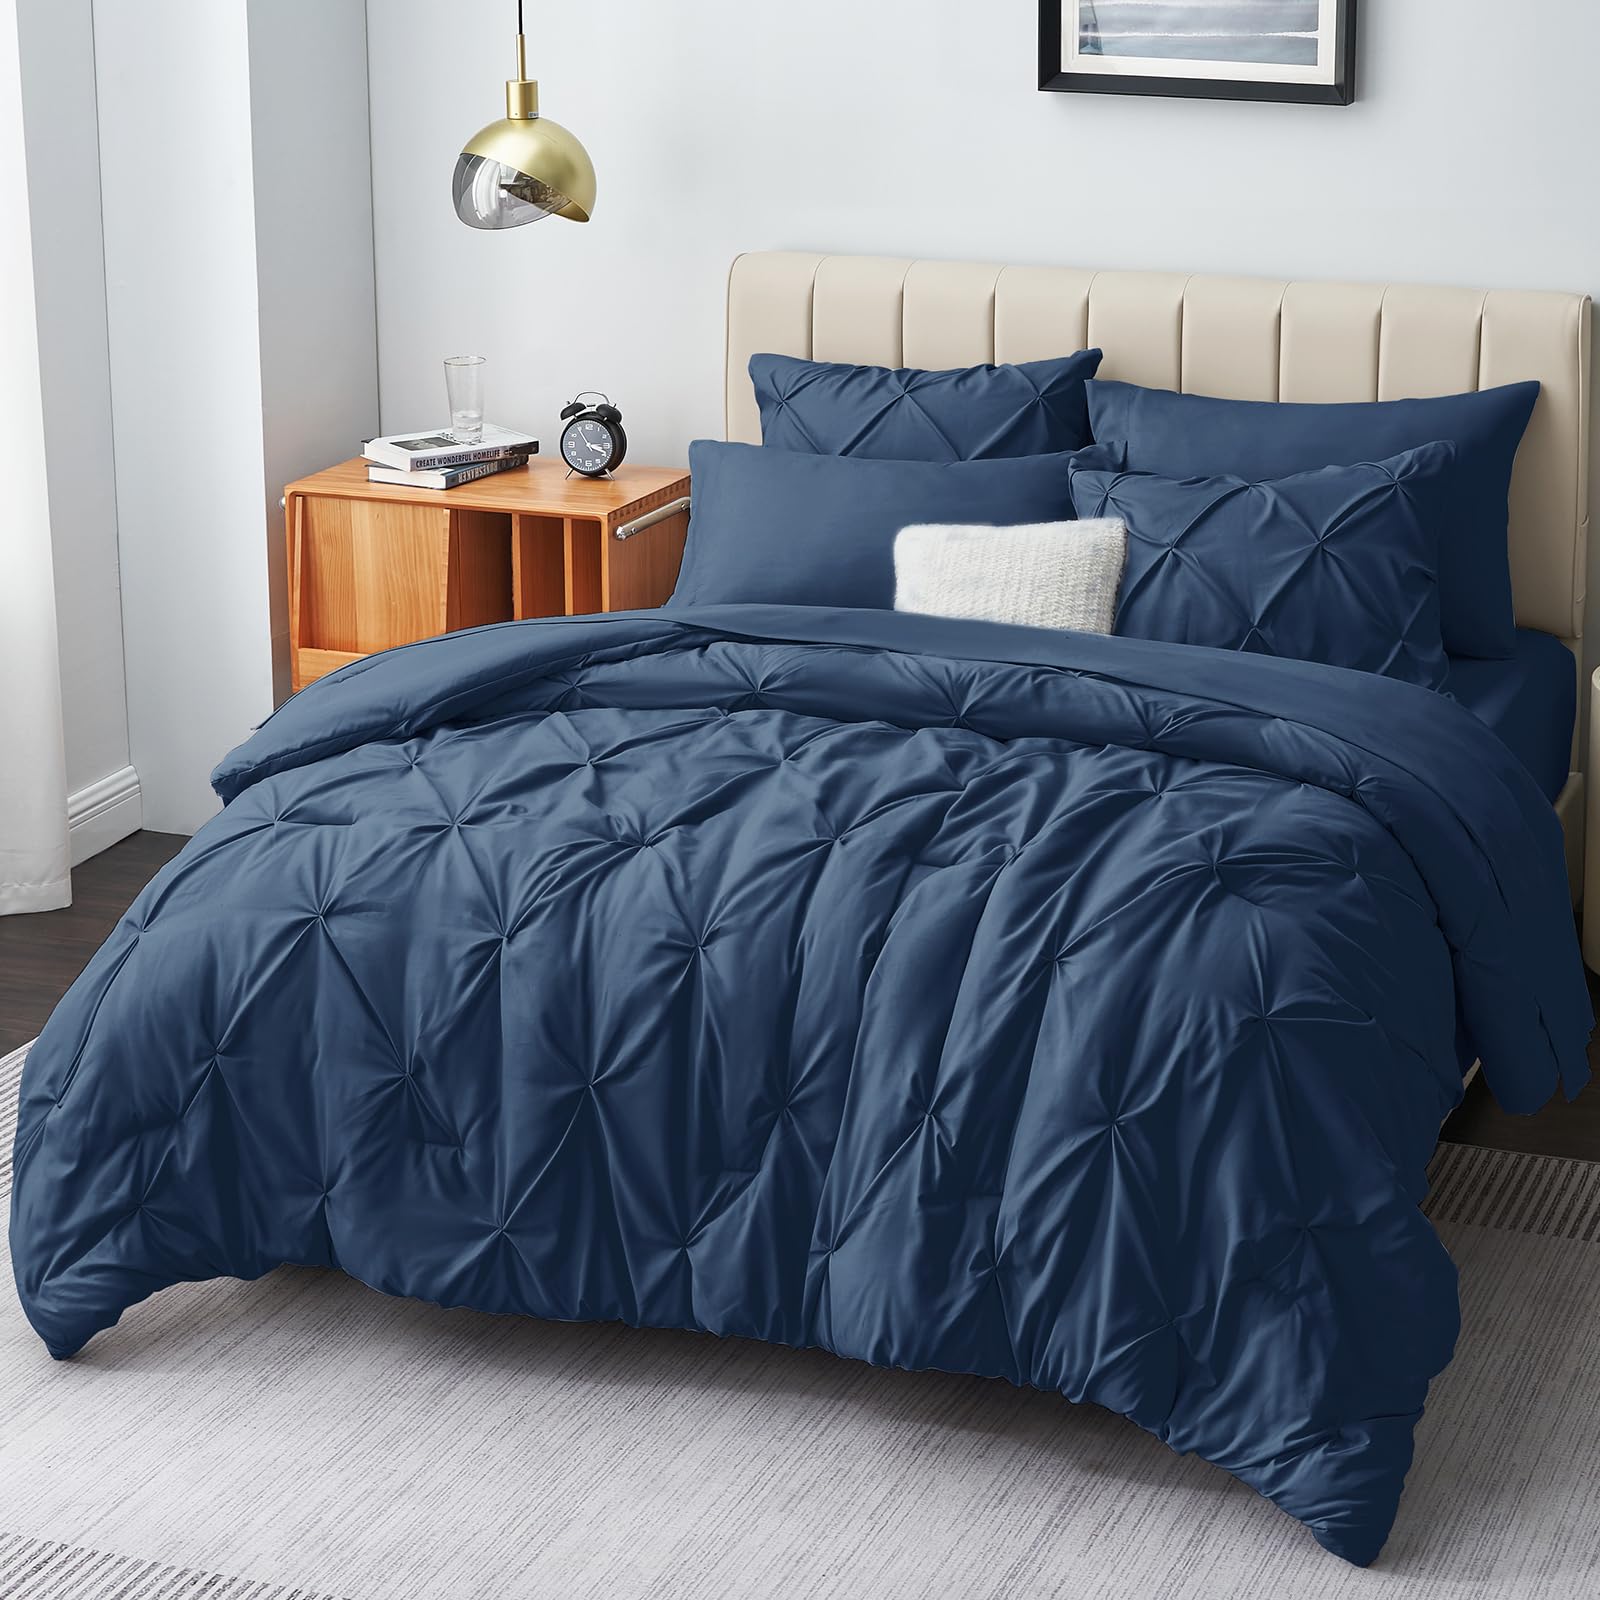 CozyLux Twin Comforter Set - 5 Pieces Comforters Twin Size Navy Blue, Pintuck Bed in A Bag Pinch Pleat Bedding Sets with Comfort